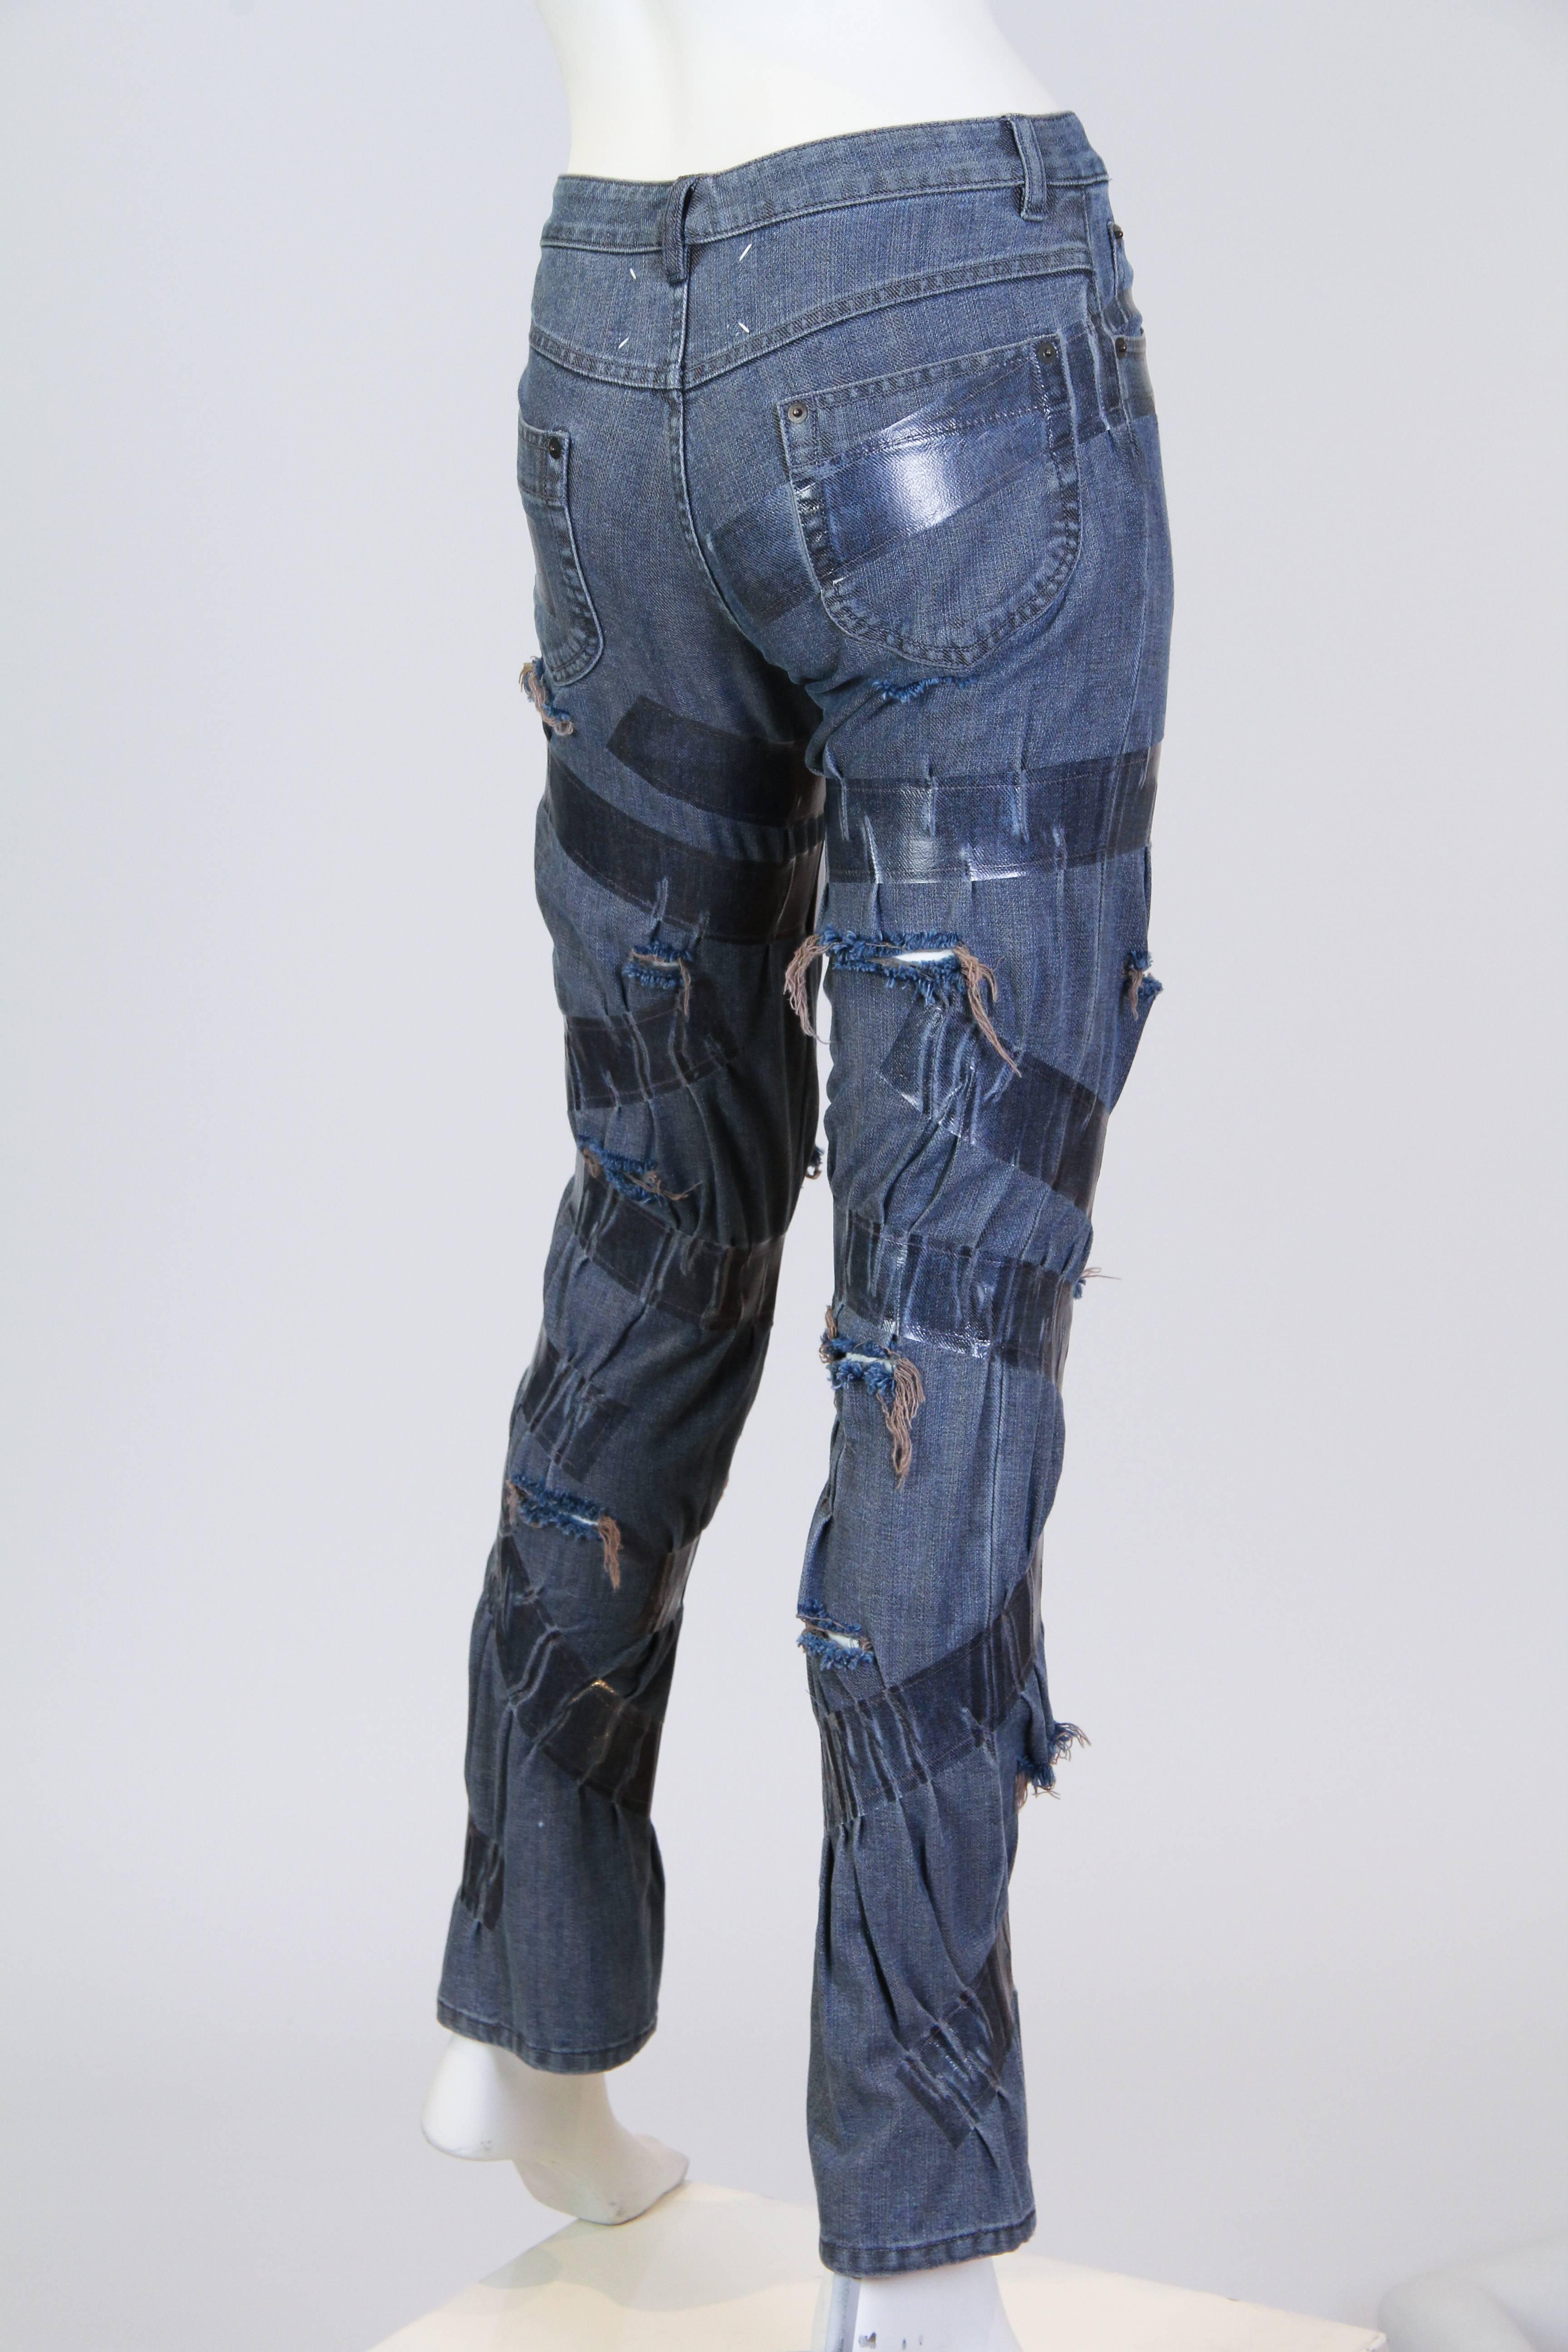 These jeans have been slashed and then "taped" back together by renowned designer Martin Margiela. The tape is actually a heat set plastic band which is permanent  and isn't sticky. 